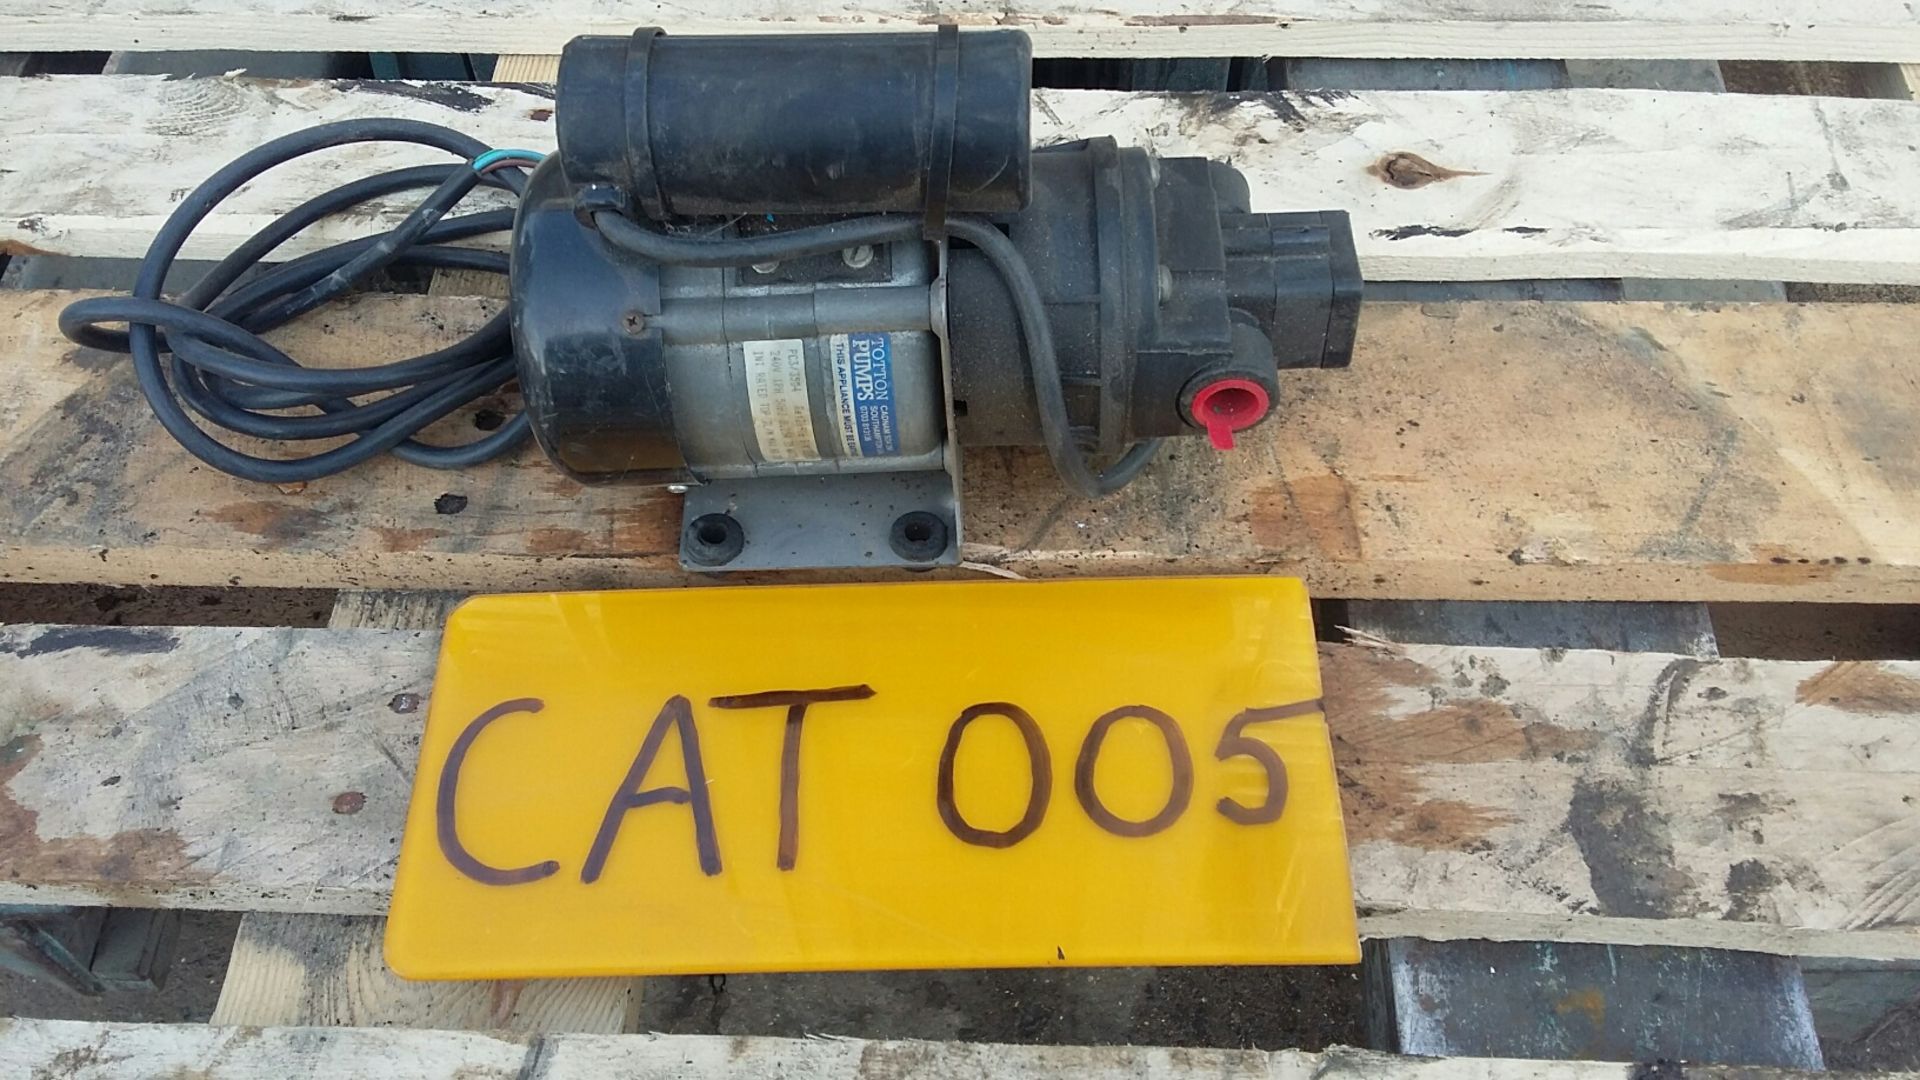 Totton PC3 34D4 Polyprop Water Pump, single phase